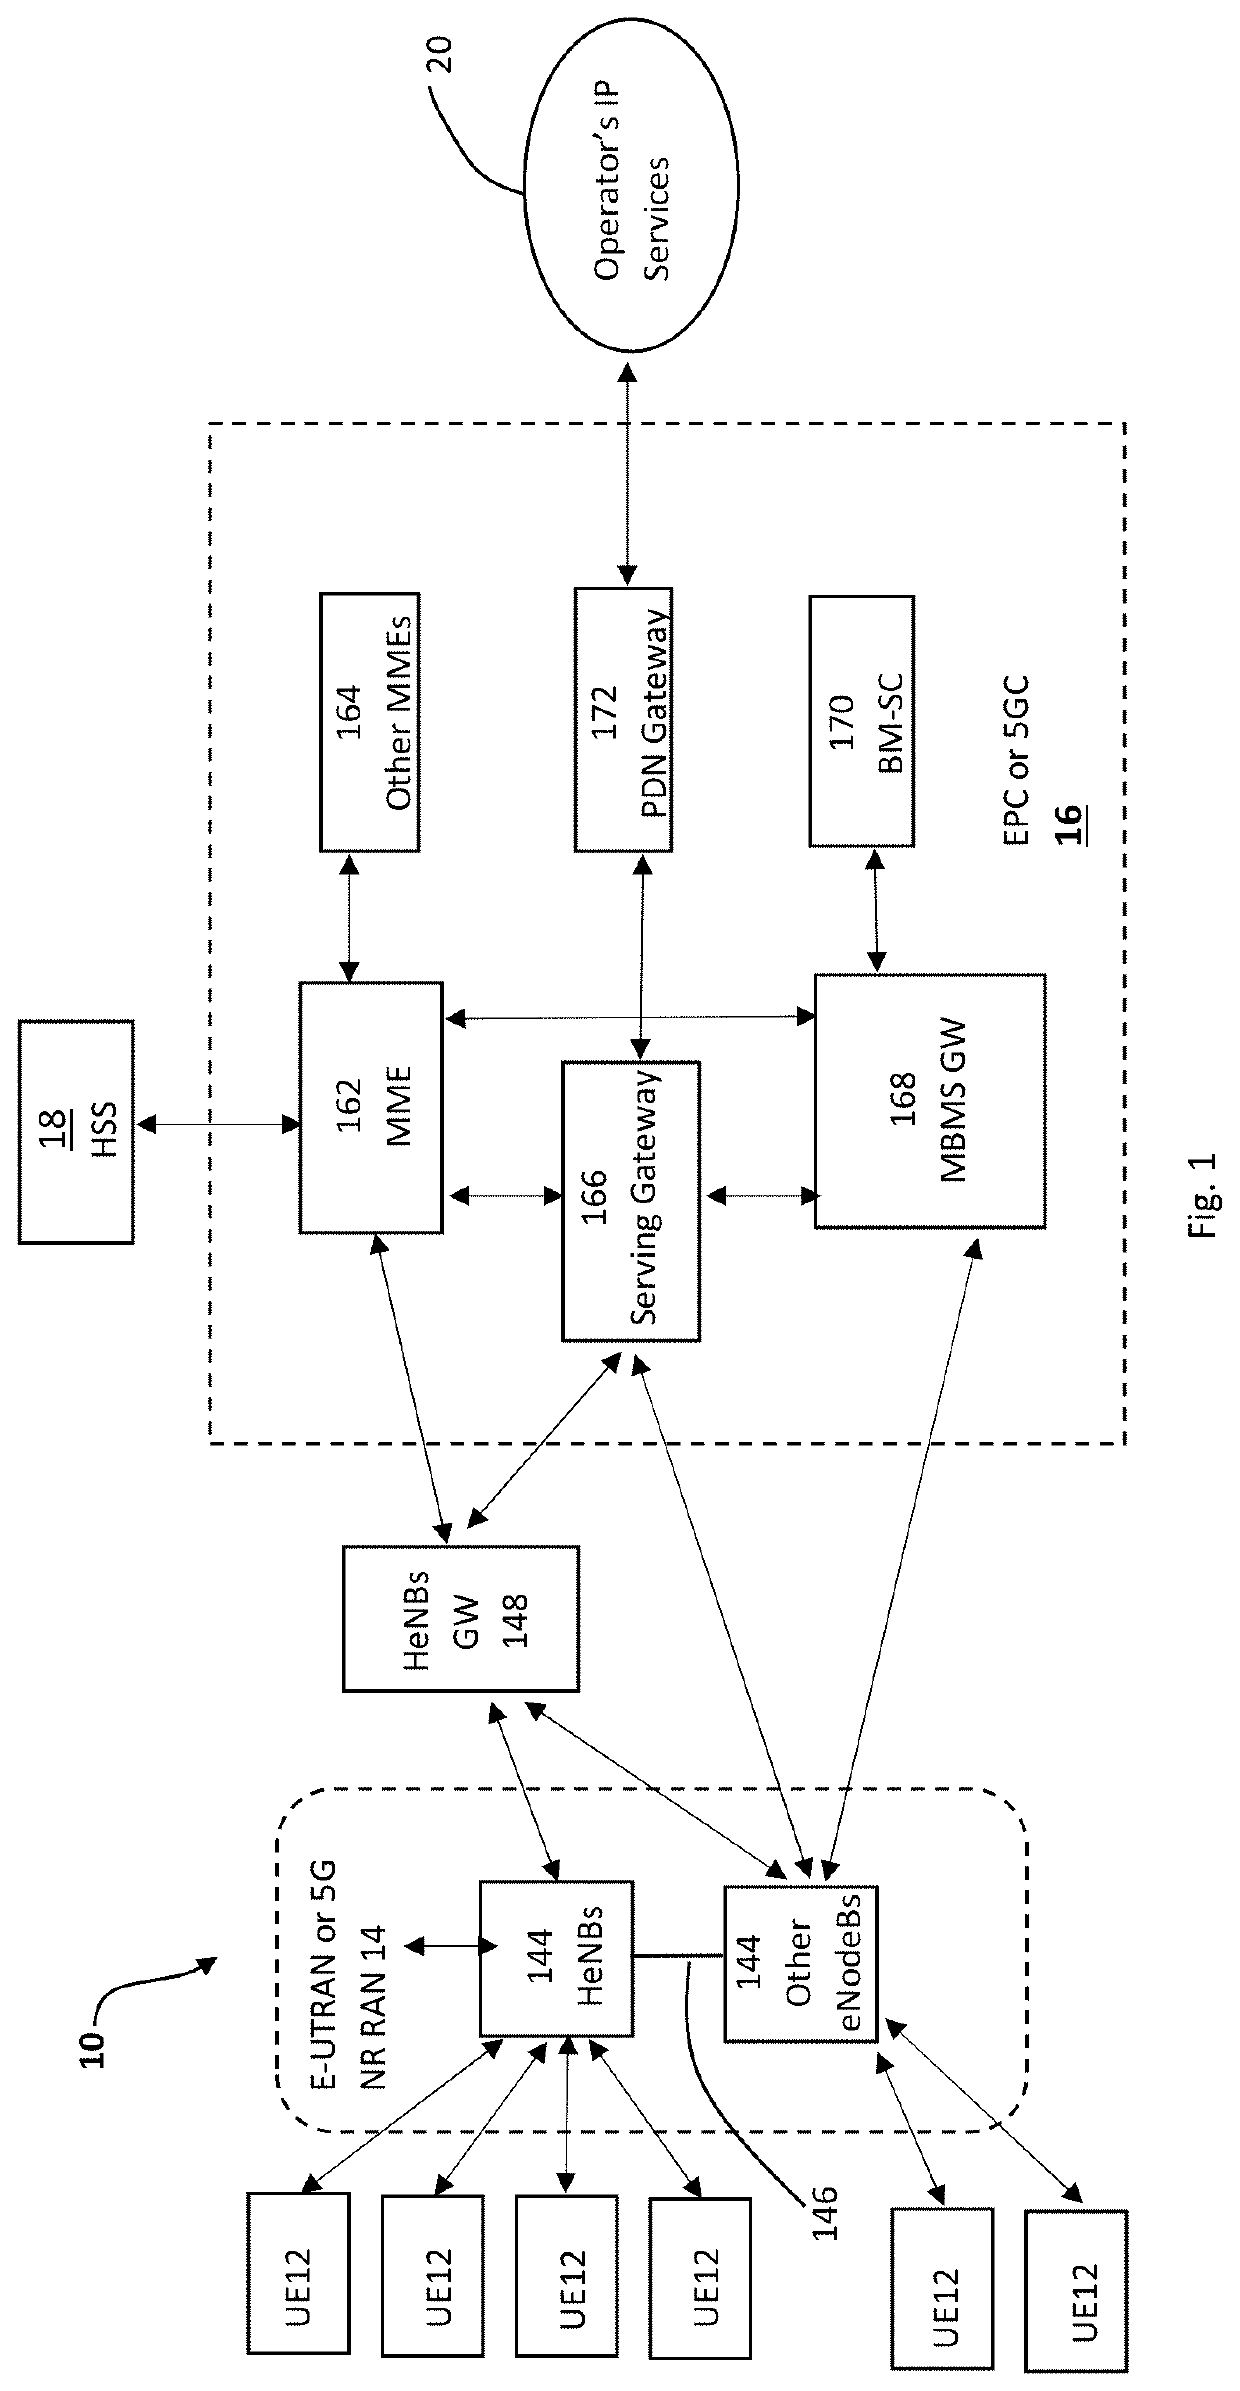 Method and Apparatus for Modifying a User Data Path in a Wireless Communication Network